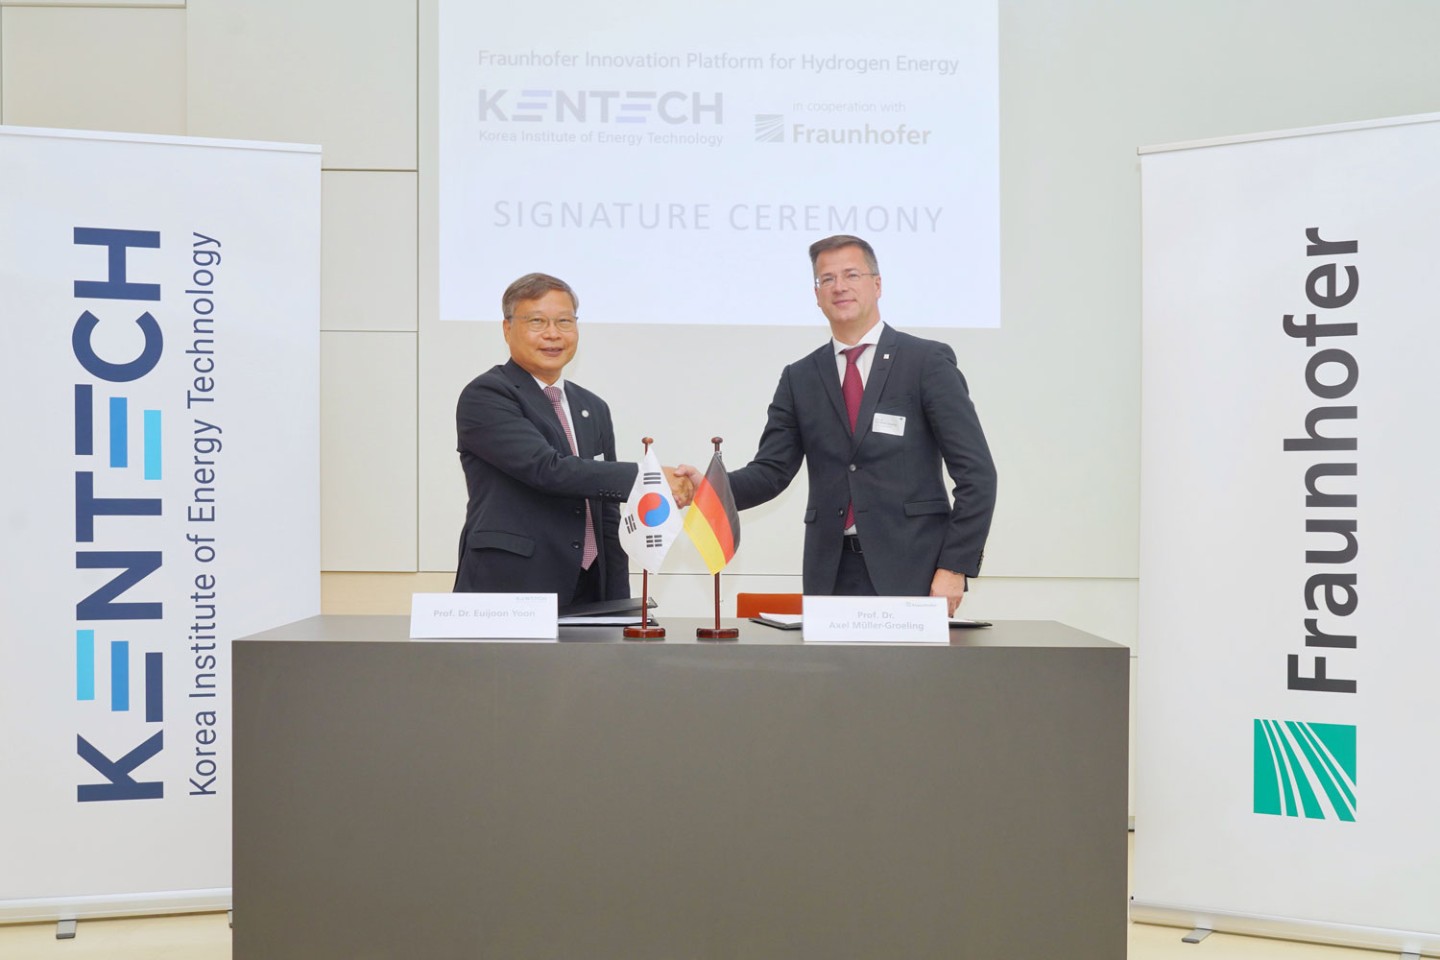 Prof. Dr. Euijoon Yoon, President KENTECH (left), and Prof. Dr. Axel Müller-Groeling, Executive Board of Fraunhofer-Gesellschaft e.V. - Research Infrastructures and Digitization (right), at the signing of the contract in Berlin for the Fraunhofer Innovation Platform for Hydrogen Energy at Korea Institute of Energy Technology (FIP-H2ENERGY@KENTECH).